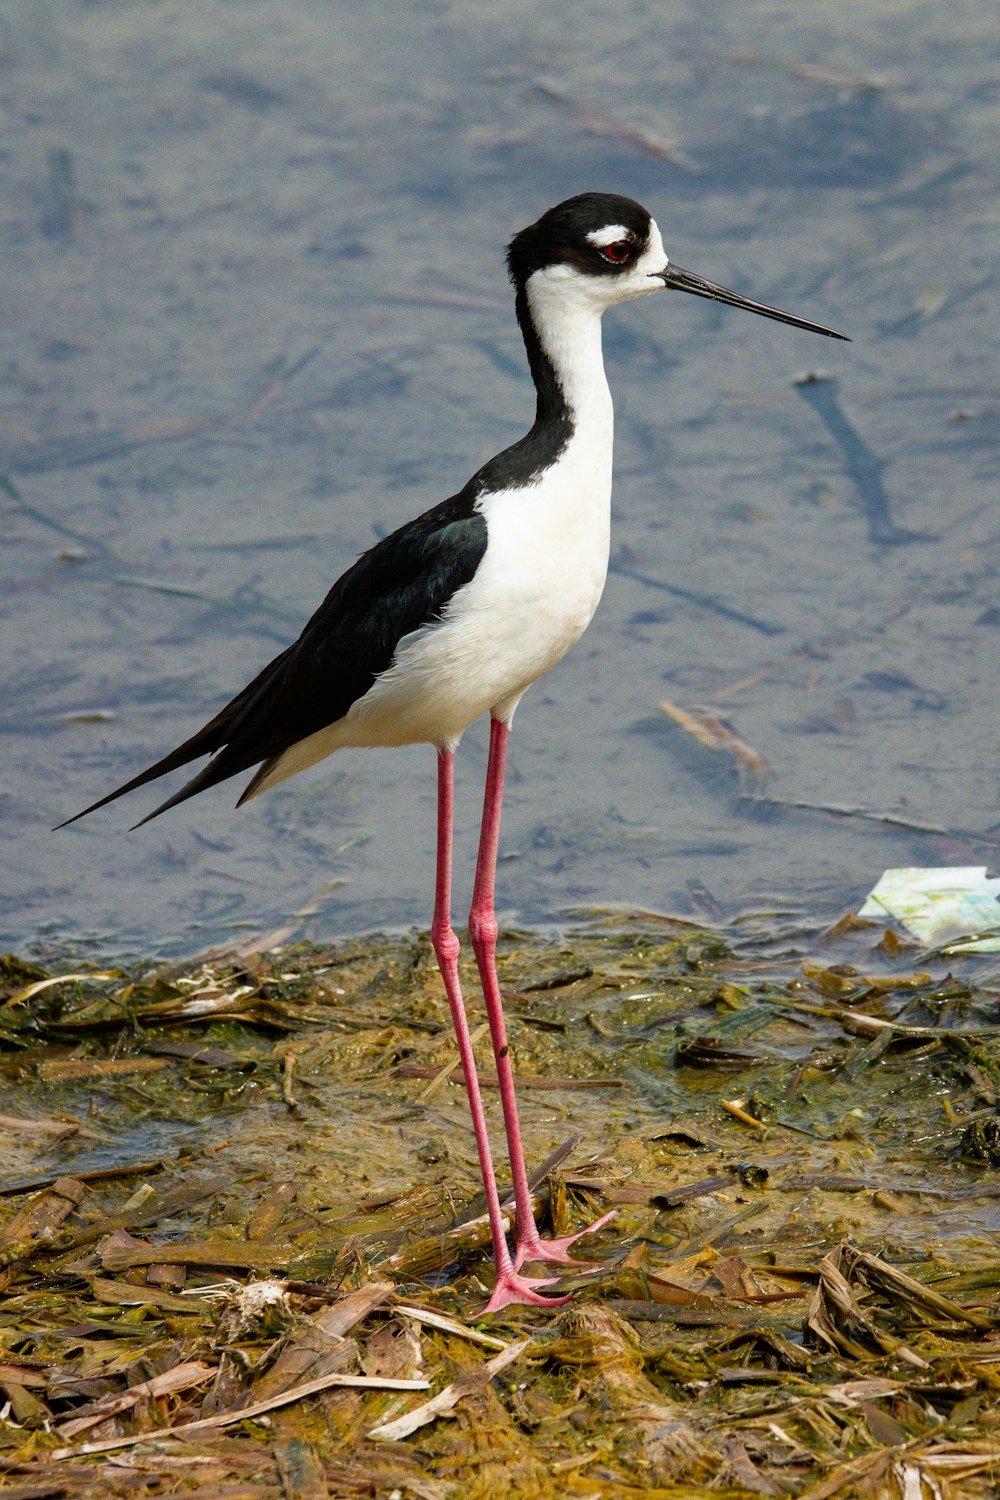 a black and white bird standing on top of a body of water